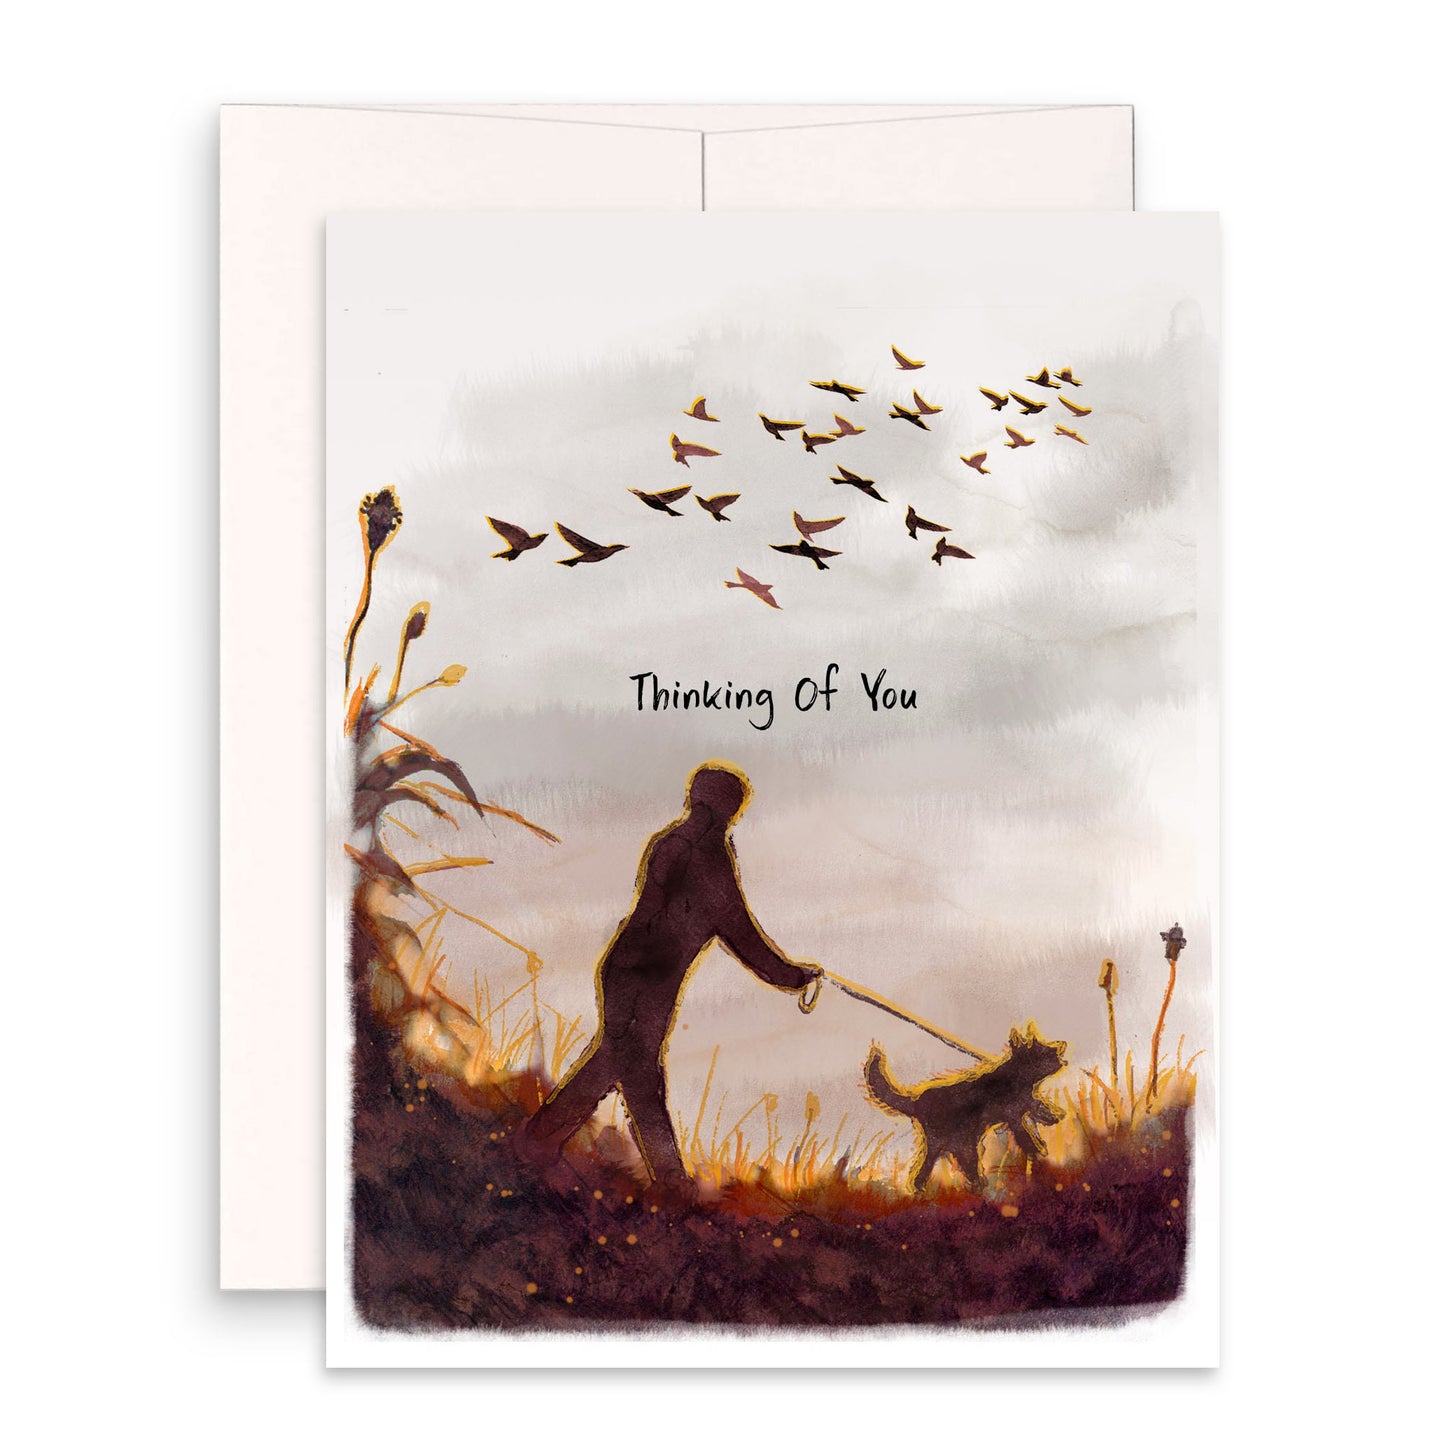 Sunset Walking Dog Sympathy Card - Loss Of Dog Thinking Of You Card For Dog Lover - Handmade Card By Liyana Studio Greeting